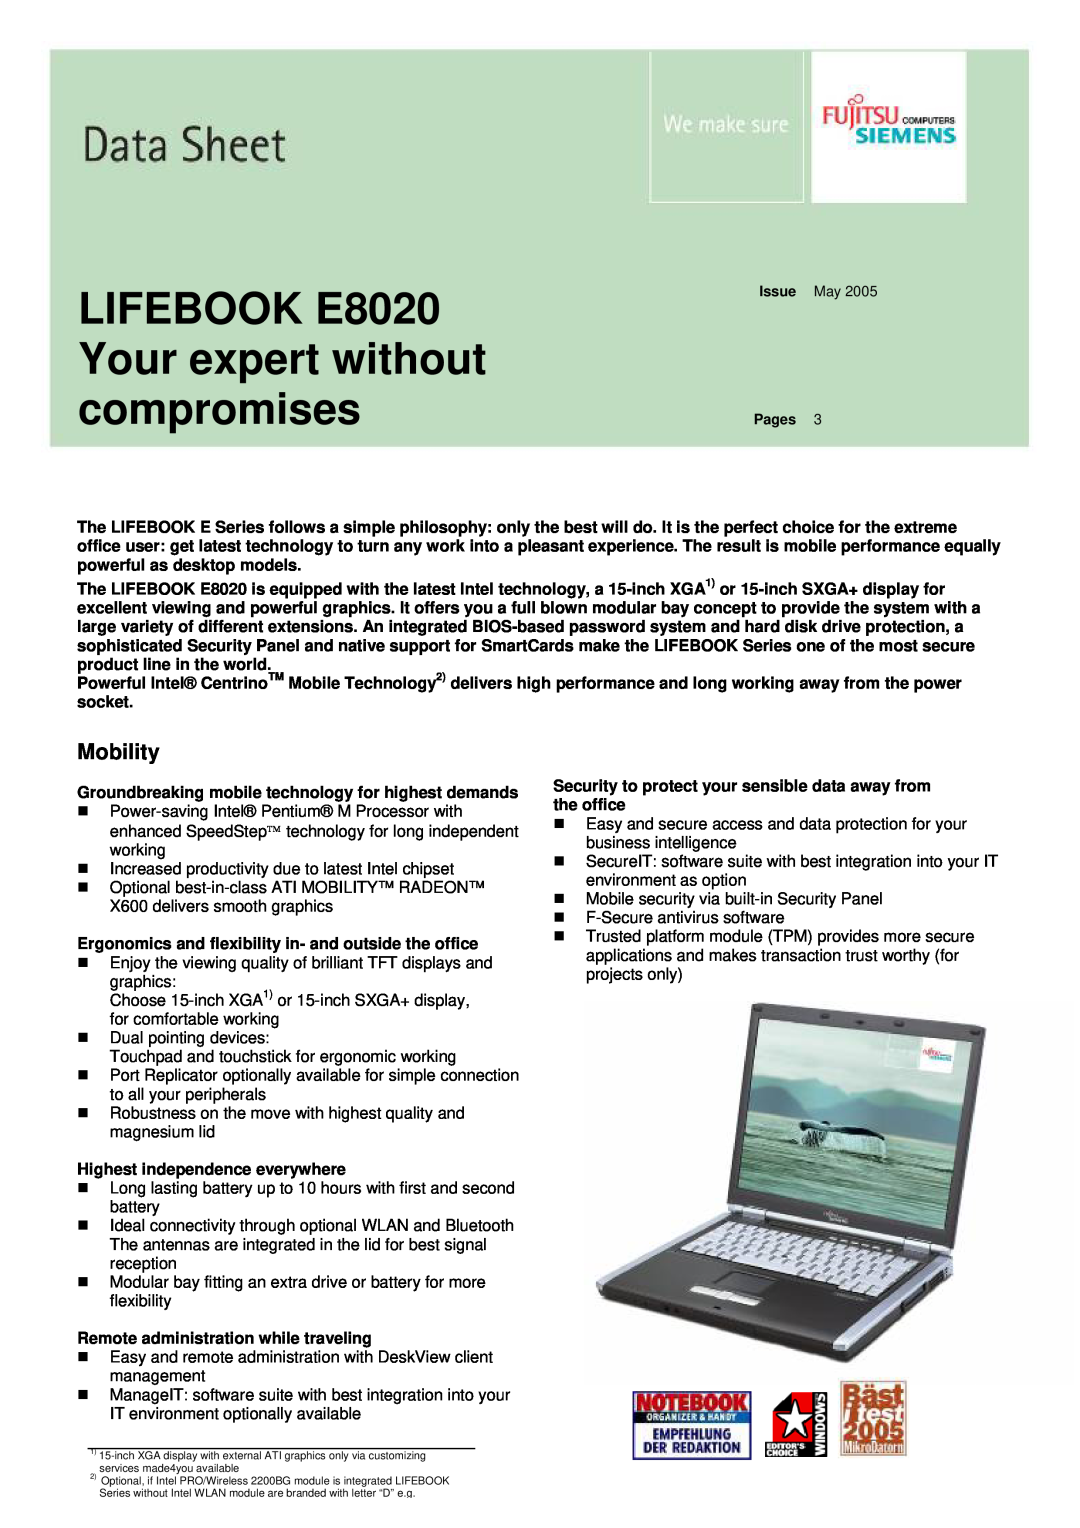 Fujitsu manual LIFEBOOK E8020 Your expert without compromises, Mobility 